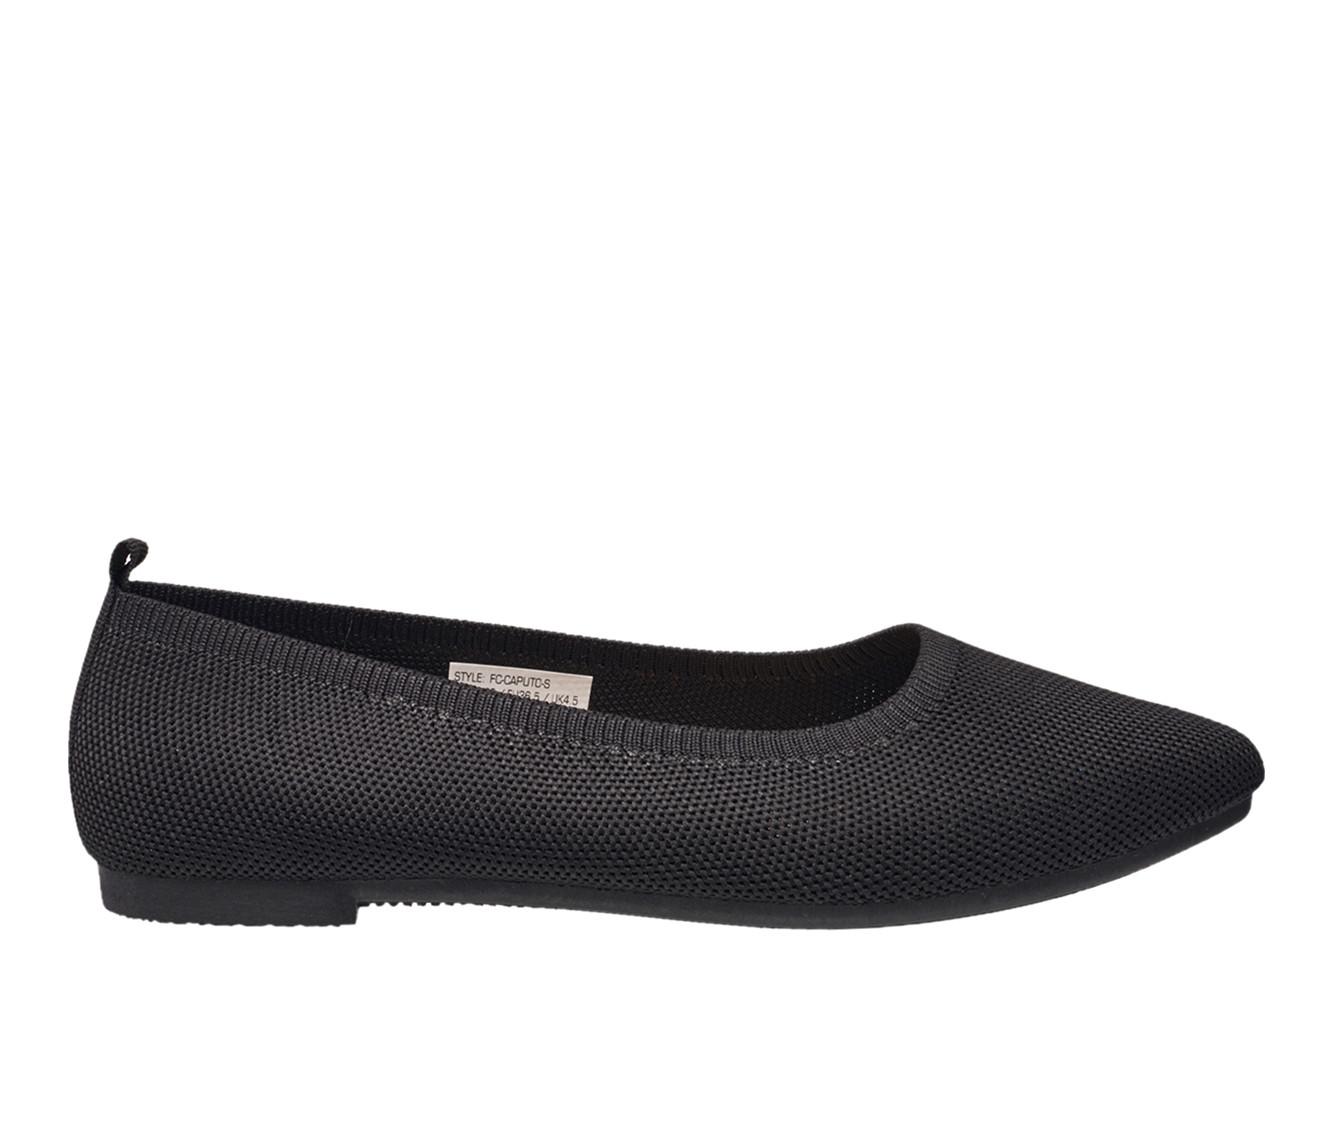 Women's French Connection Caputo Flats